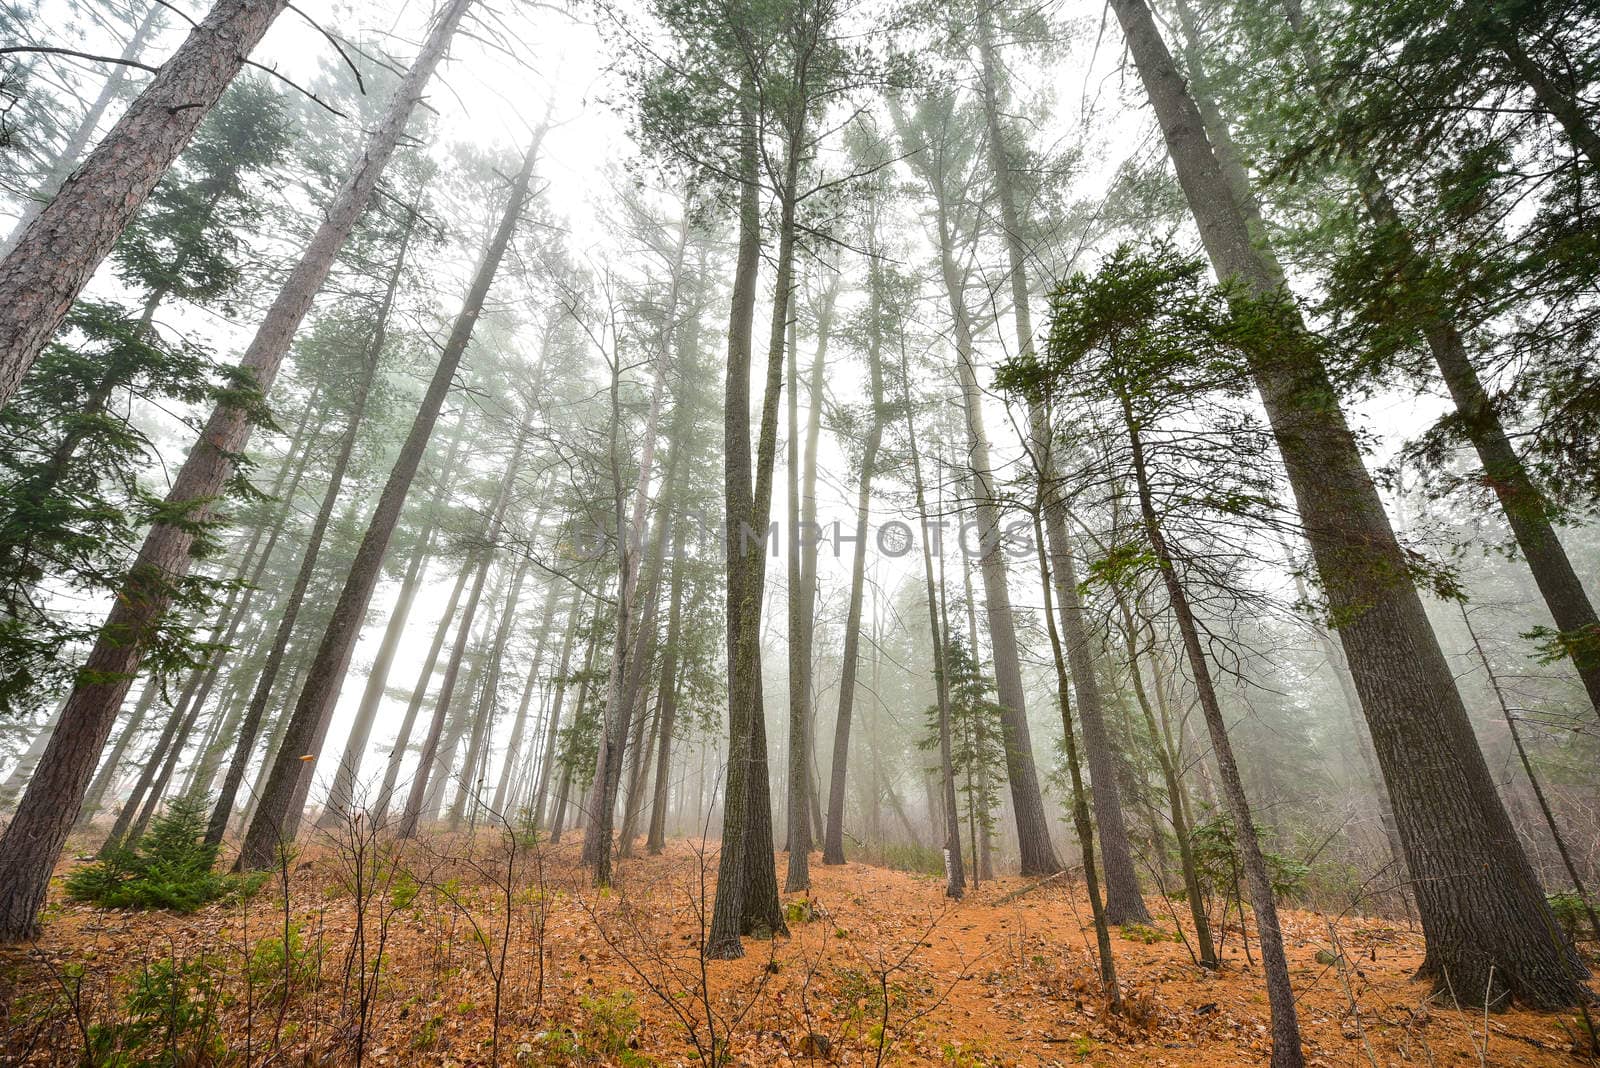 Tall pines and spruce - autumn November morning surrounded in fog. by valleyboi63